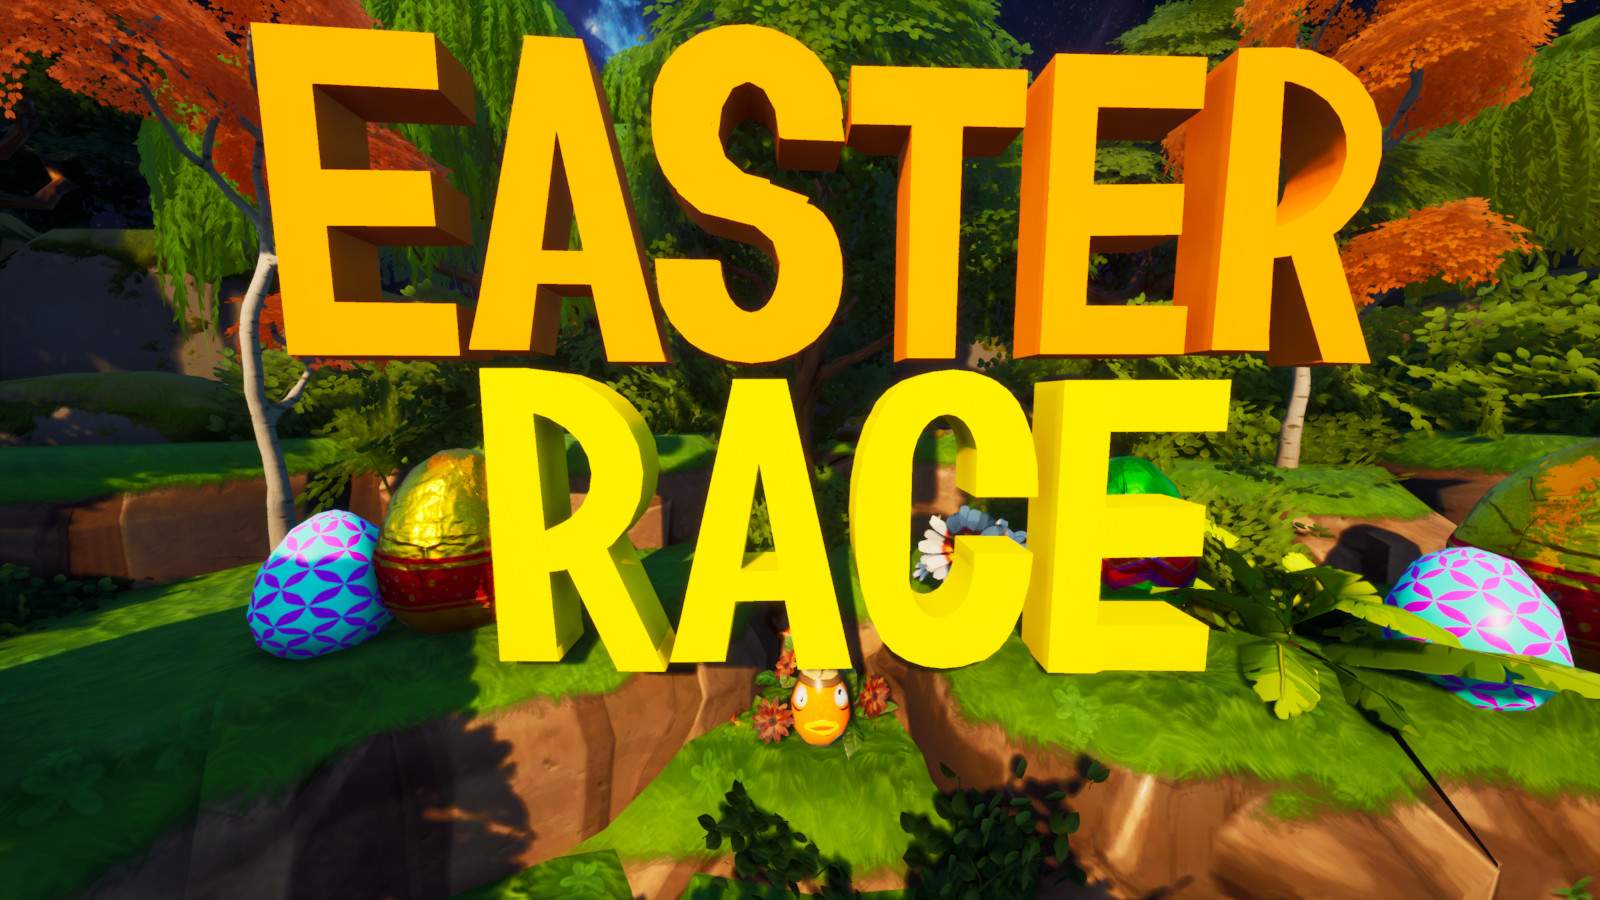 🐰THE EASTER RACE🐰